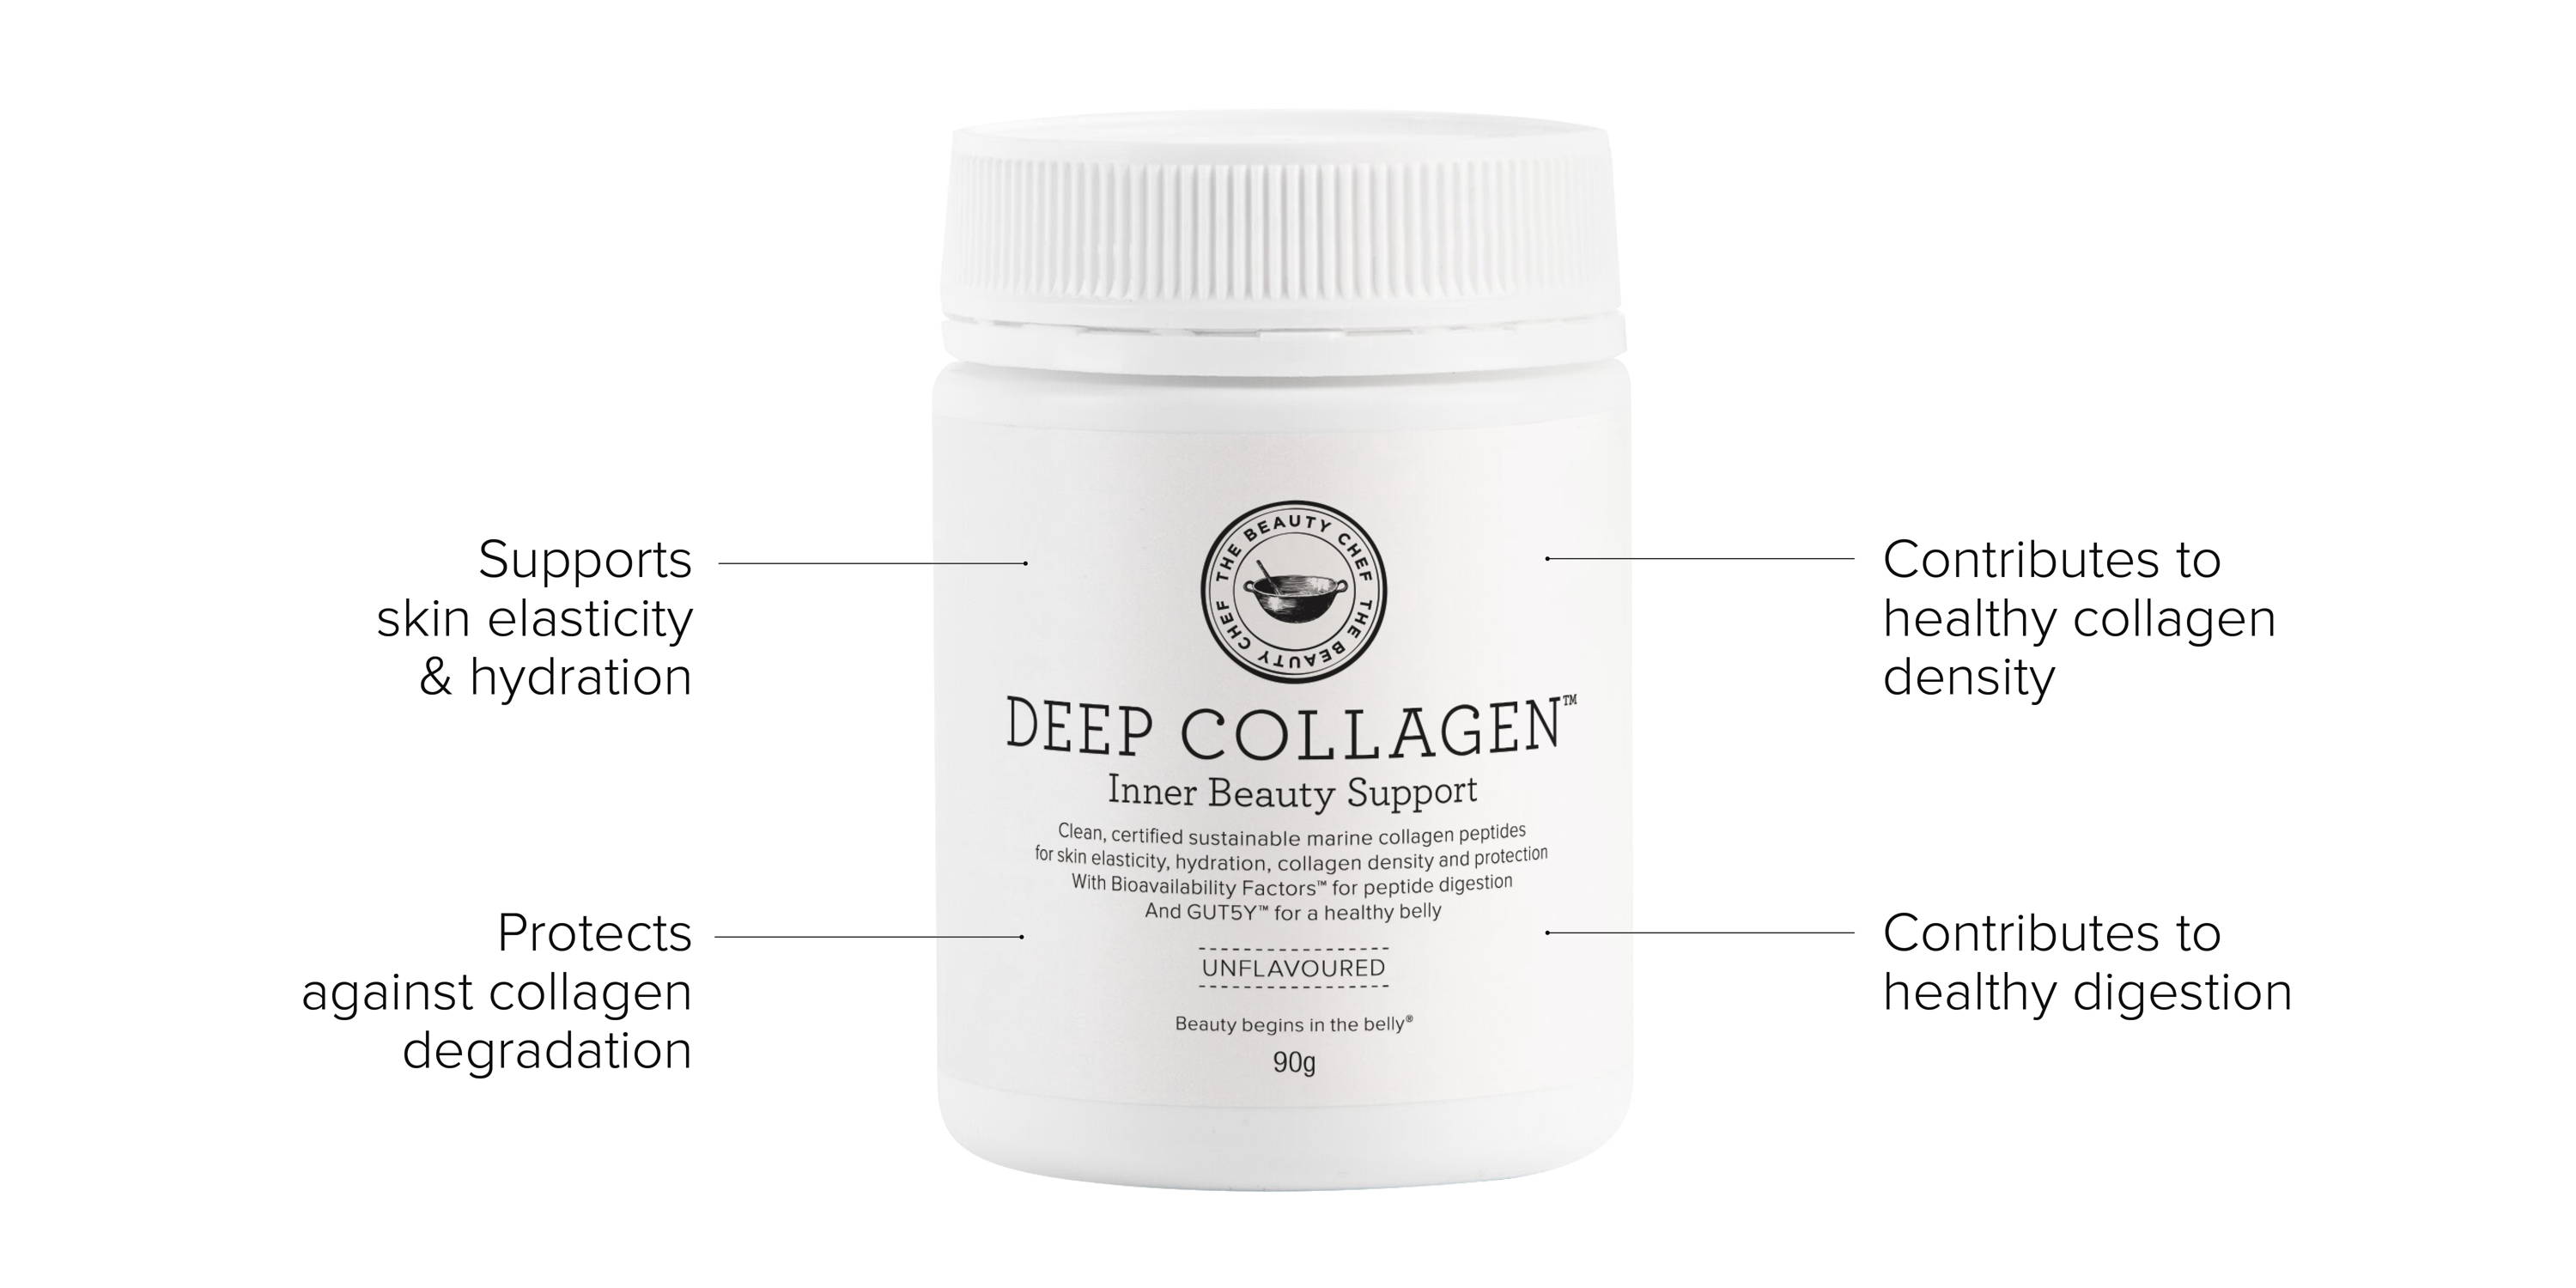 Deep Collagen | What Is Marine Collagen? | The Beauty Chef – The 